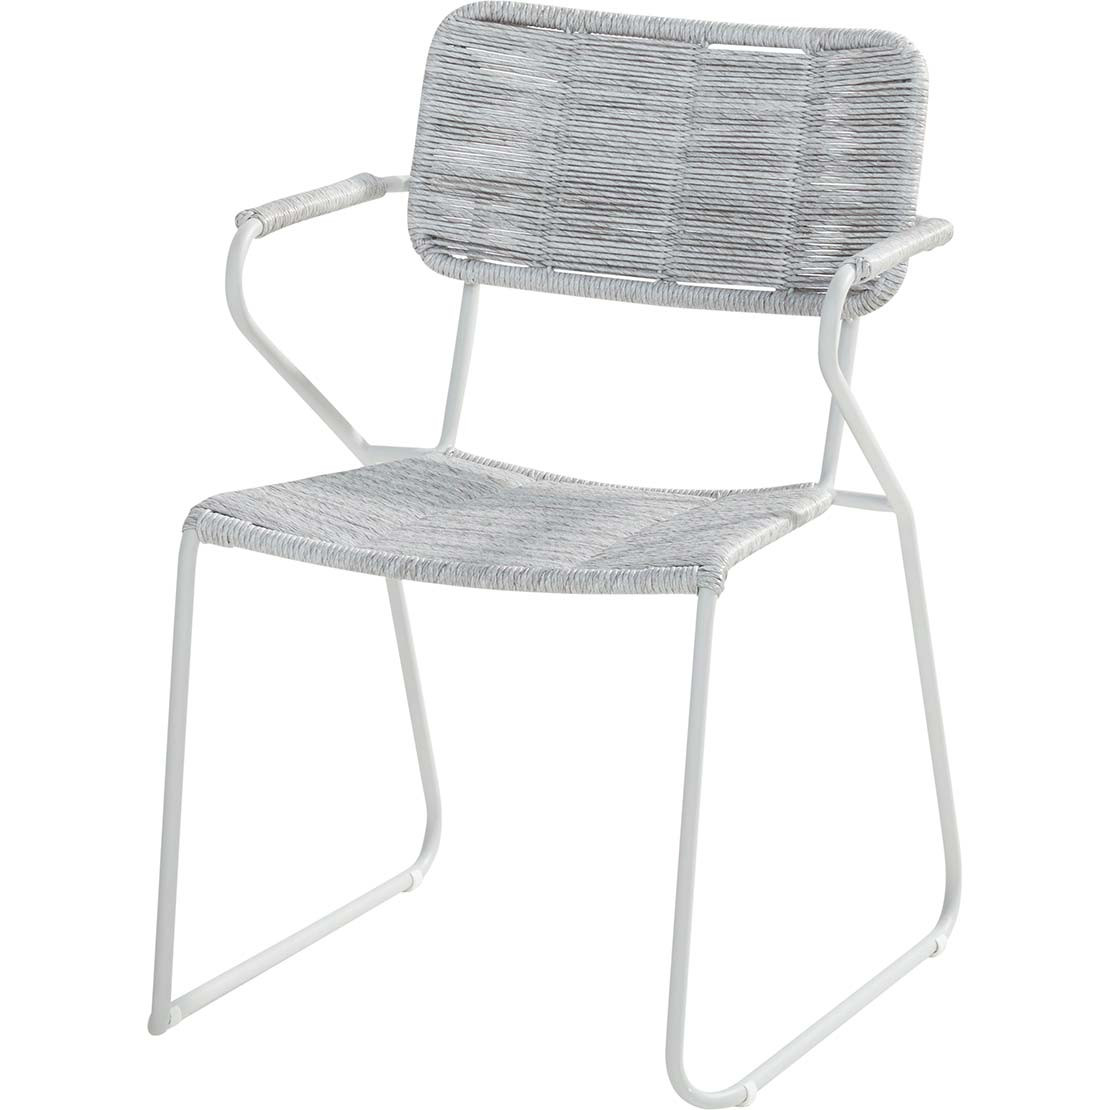 Swing stacking chair Frost Grey with Light Grey